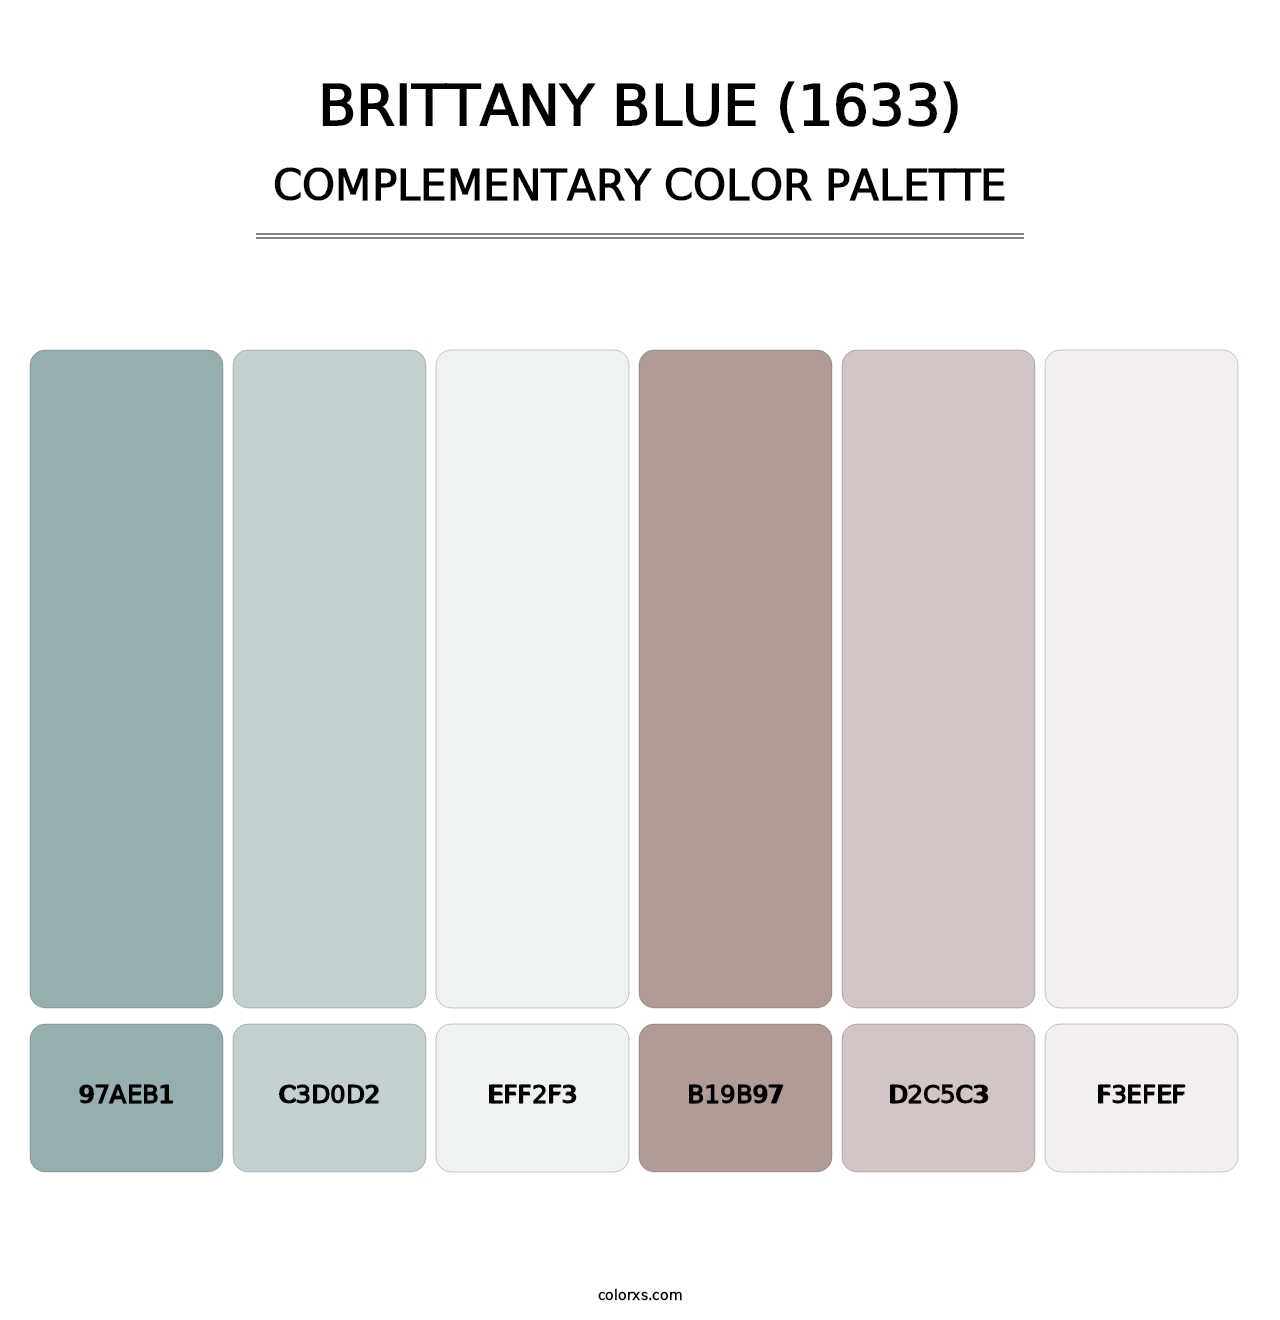 Brittany Blue (1633) - Complementary Color Palette